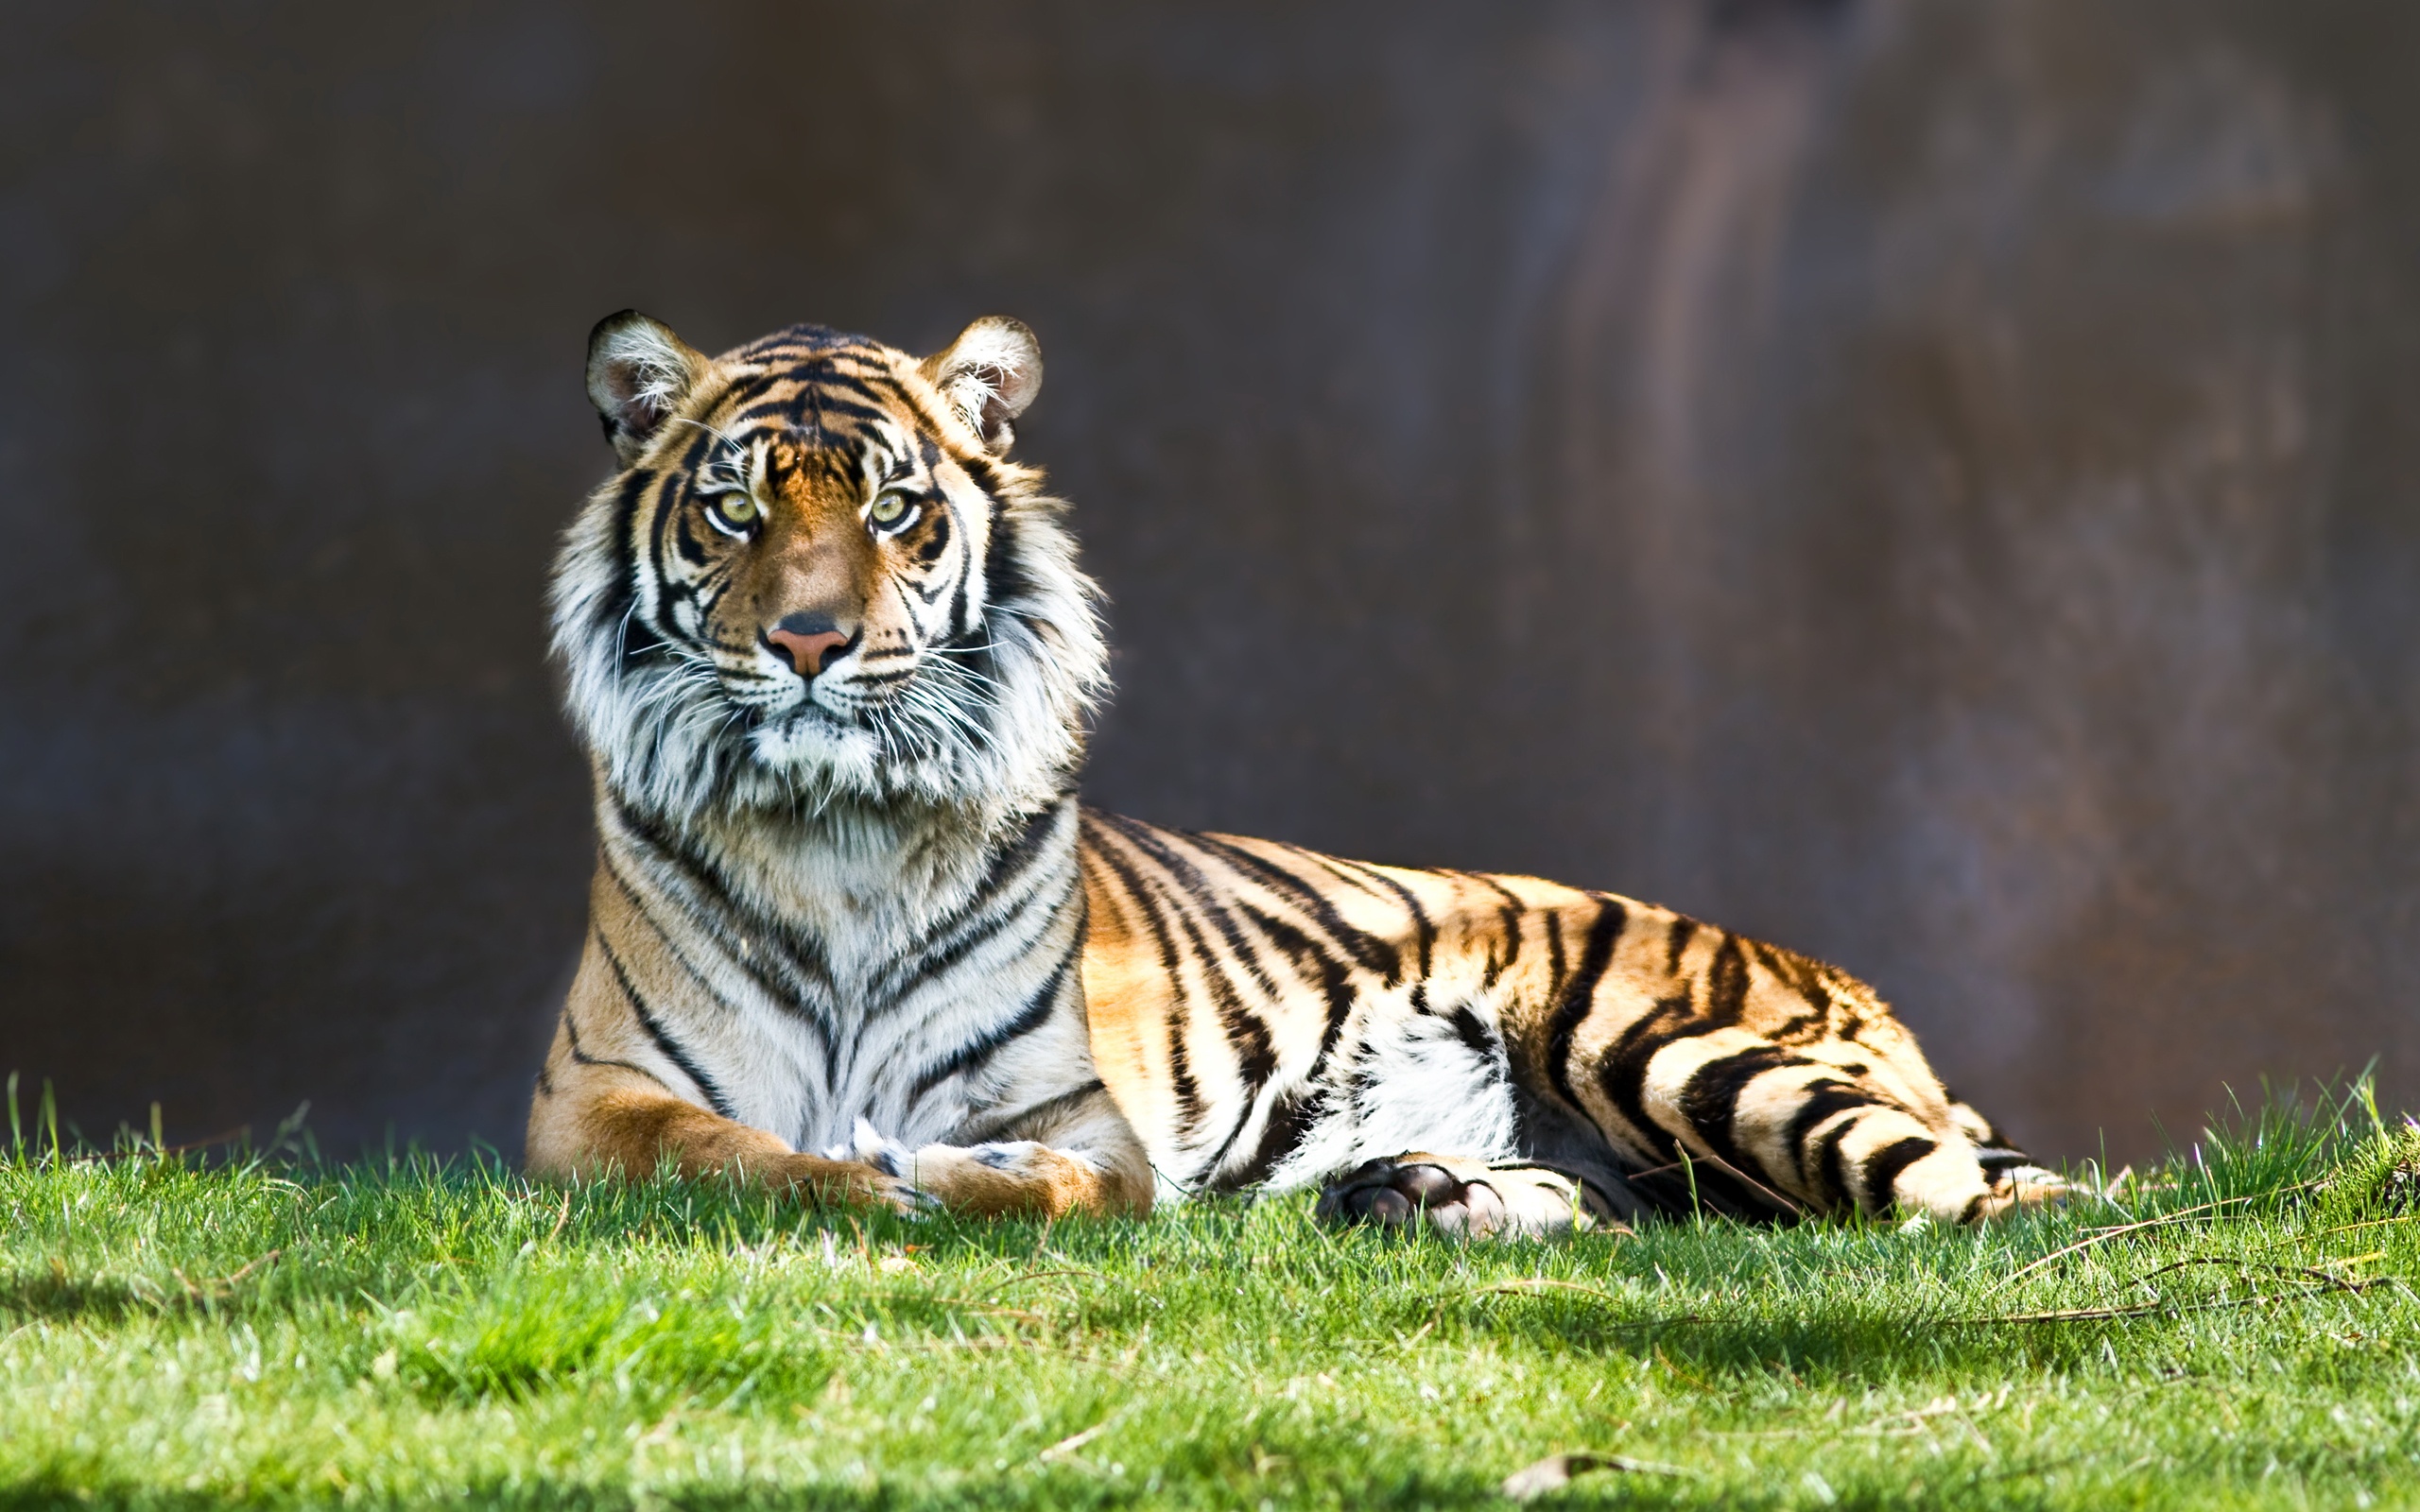 Tiger Staring Wallpapers in jpg format for free download